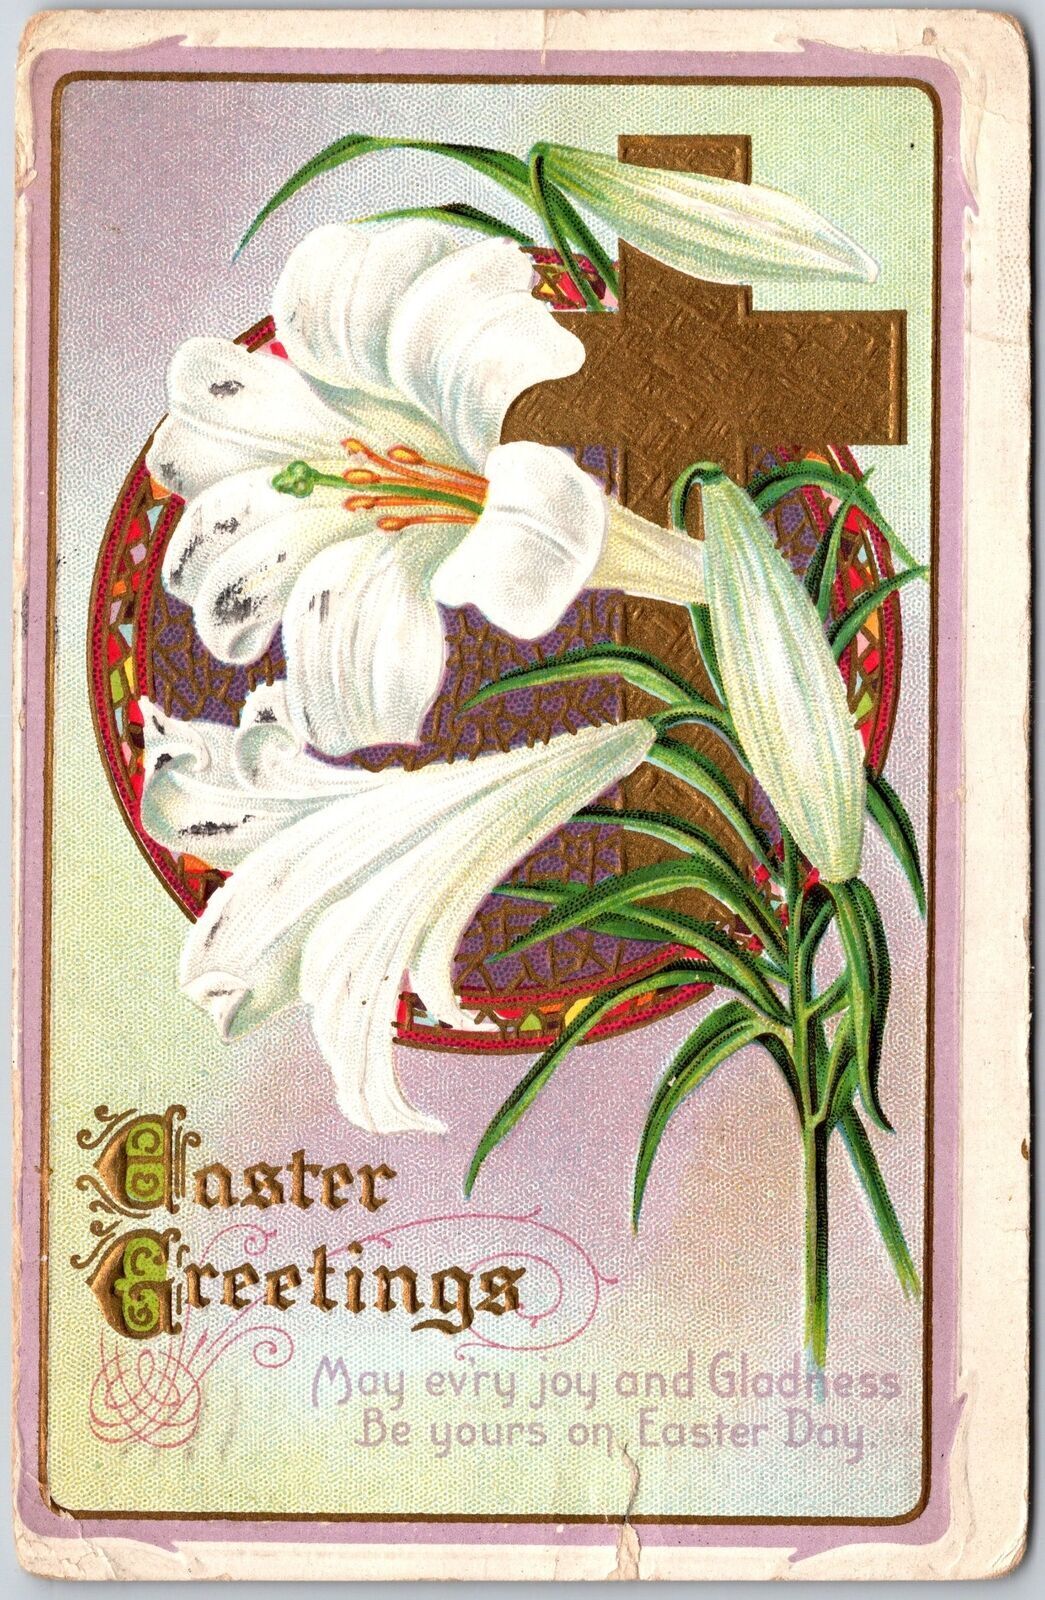 1916 Easter Greetings Flower Crucifix Wishes Card Posted Postcard